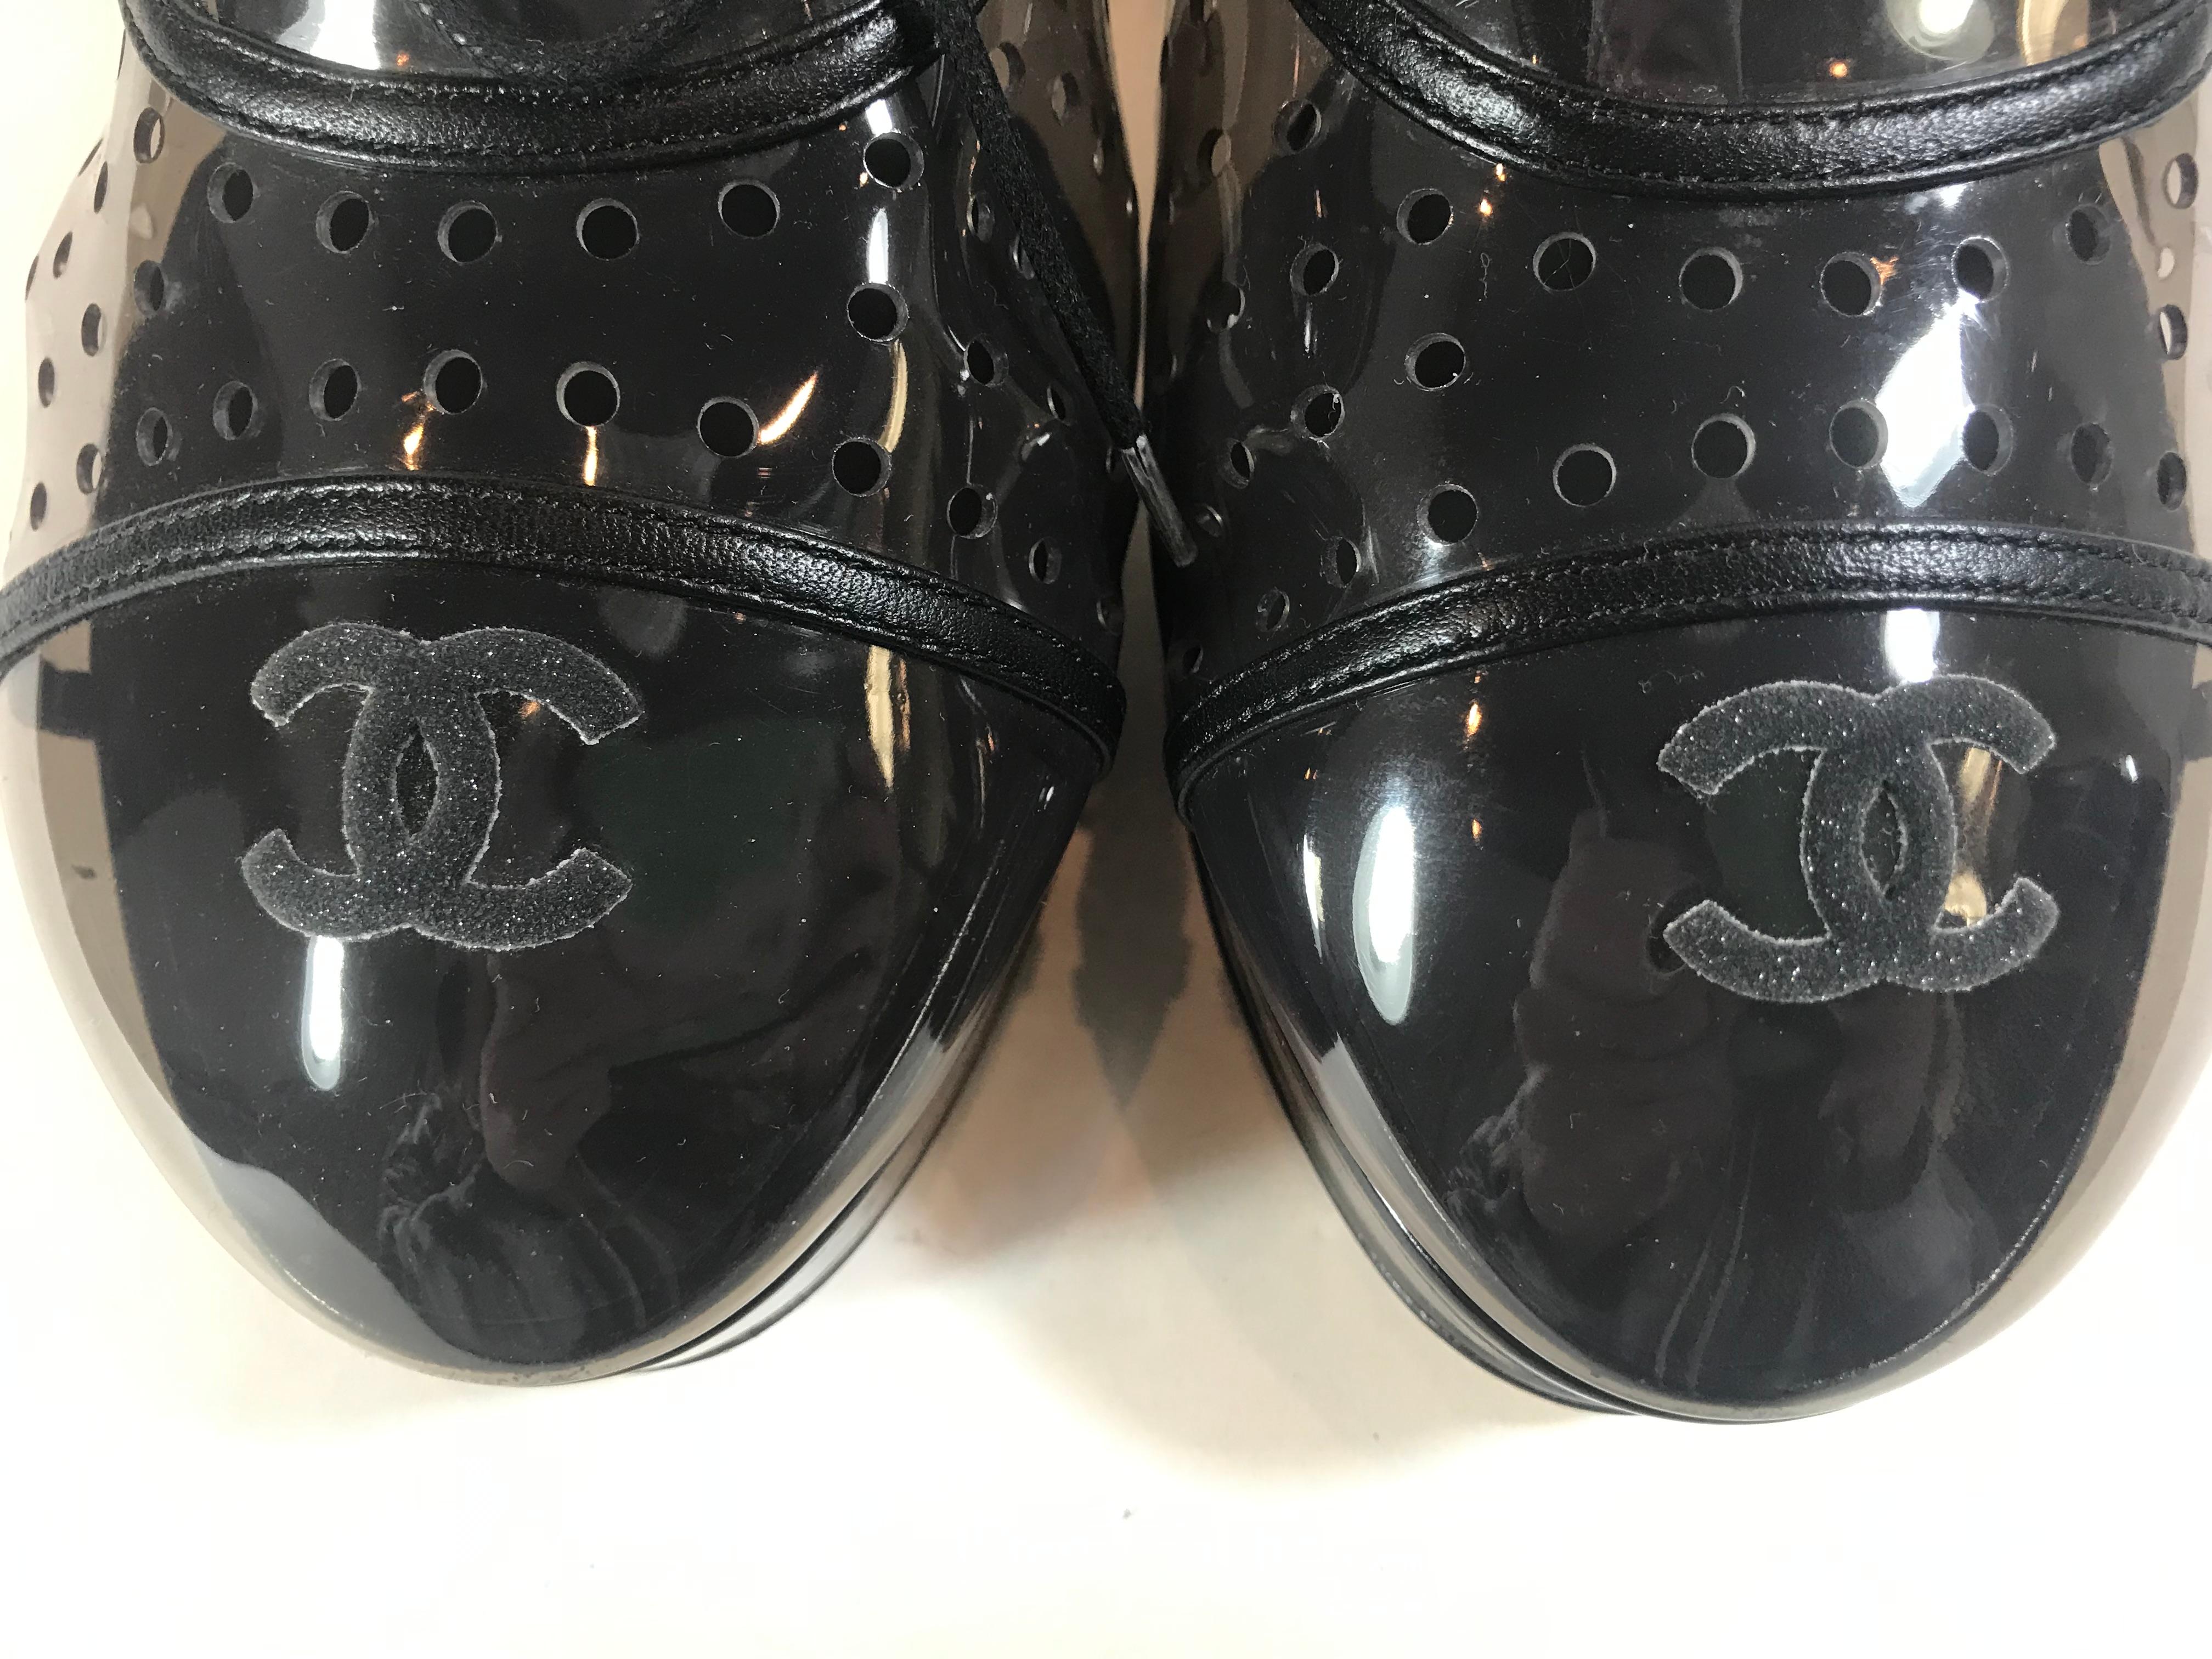 Chanel 2016 Perforated PVC Oxfords In Excellent Condition For Sale In Roslyn, NY